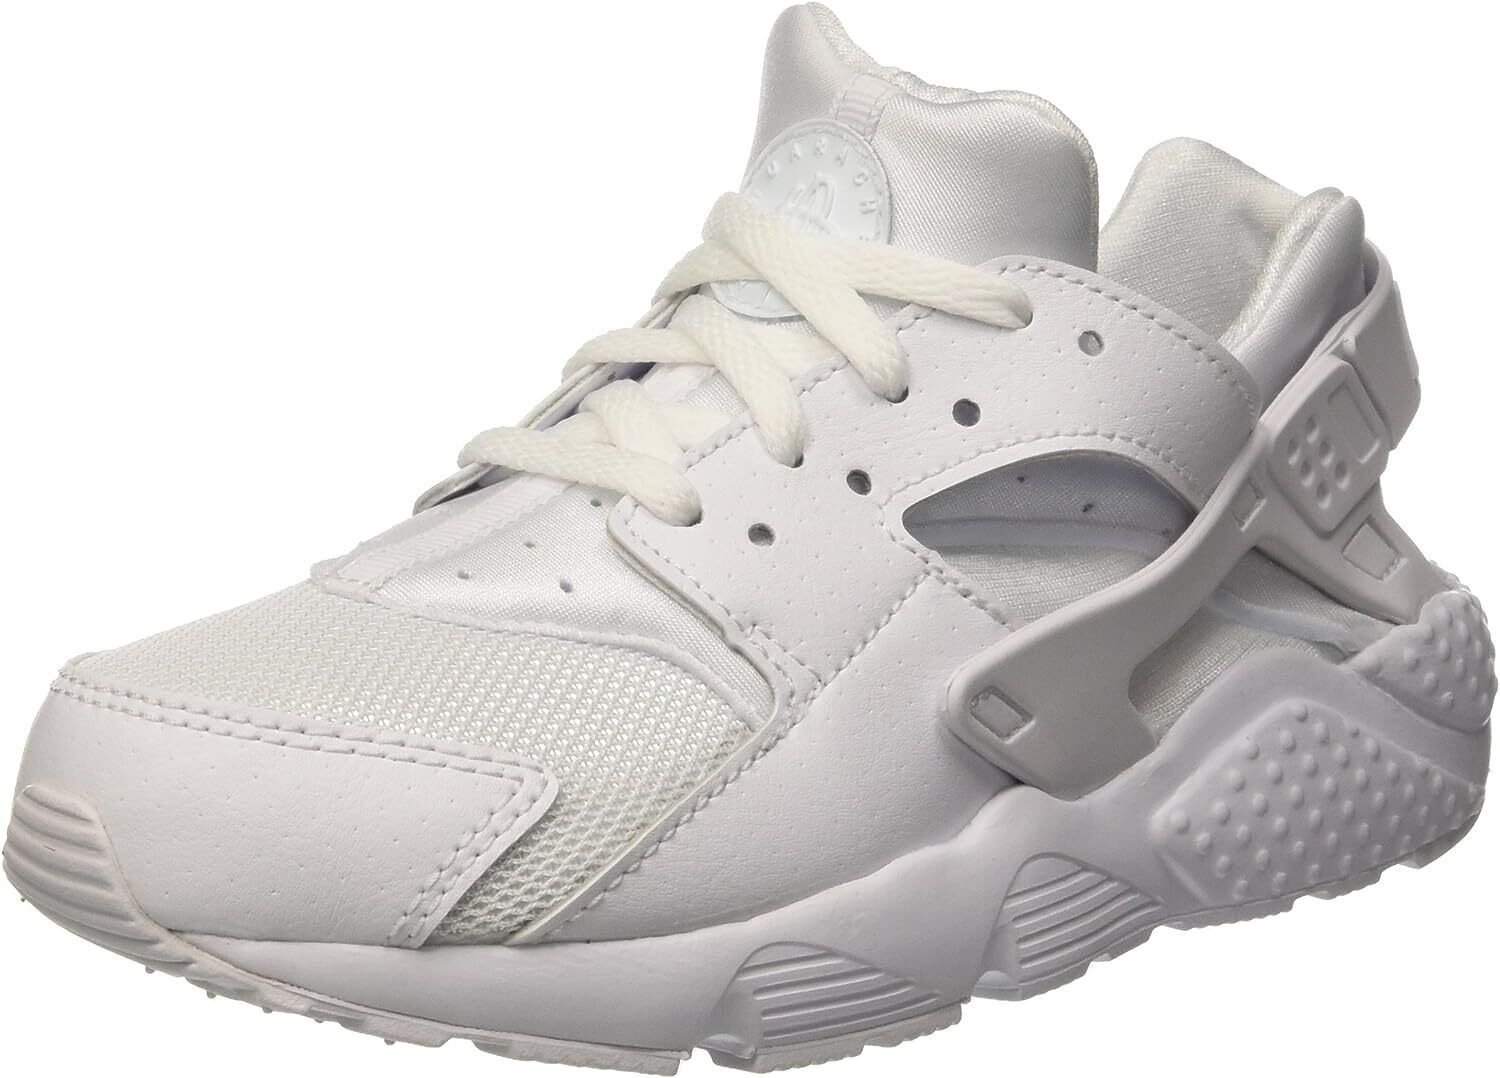 Primary image for Nike Little Kids Huarache Run Sneakers,White Pure Platinum,3Y